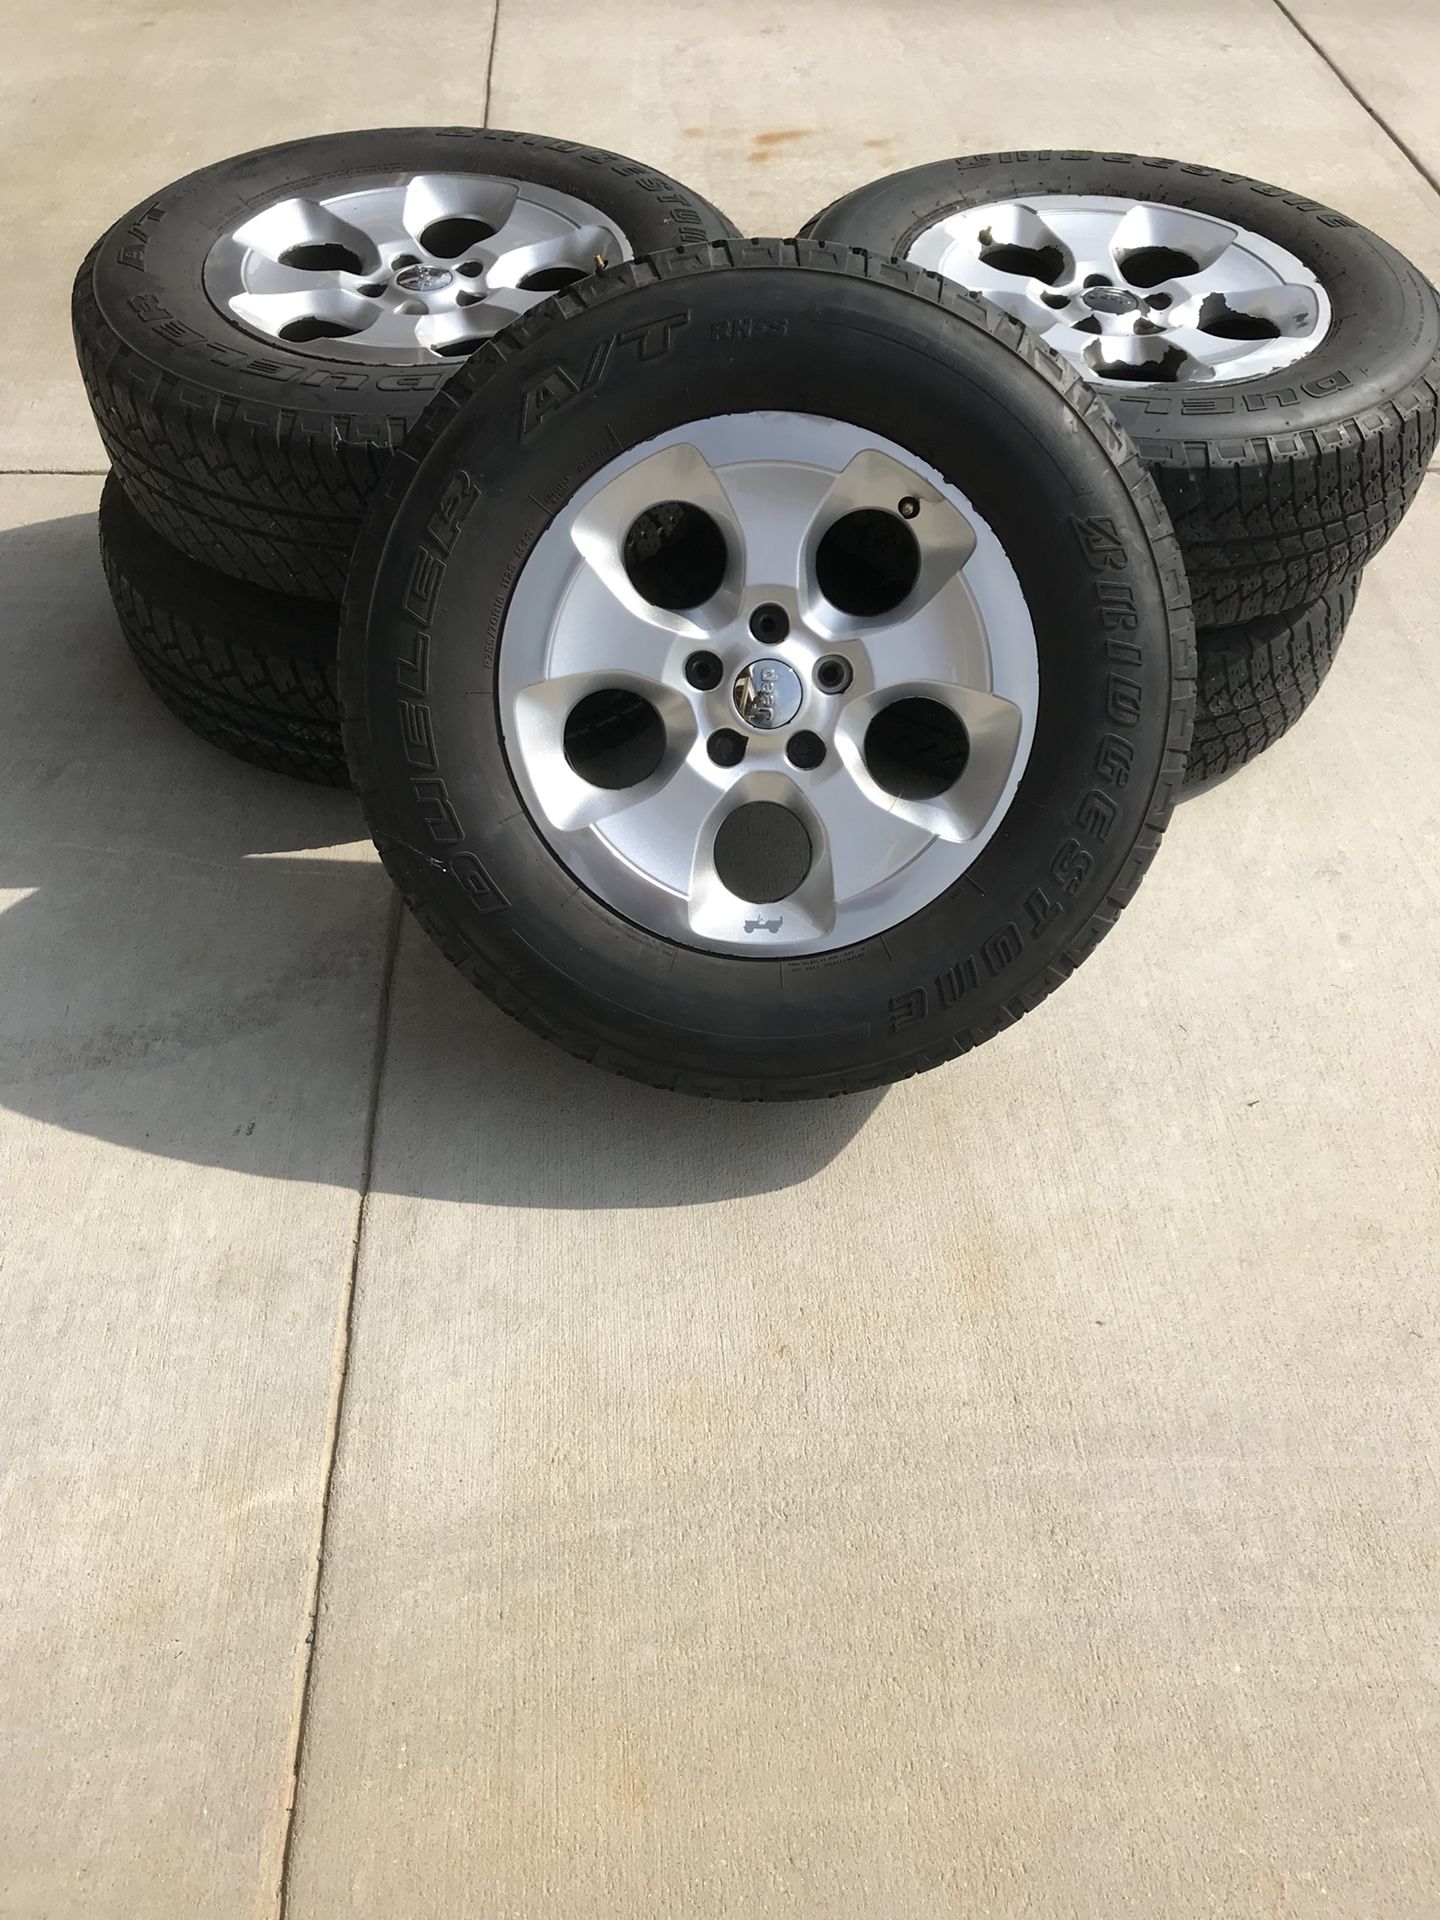 5 Jeep Wrangler Tires & Rims For Sale standard size 32x10